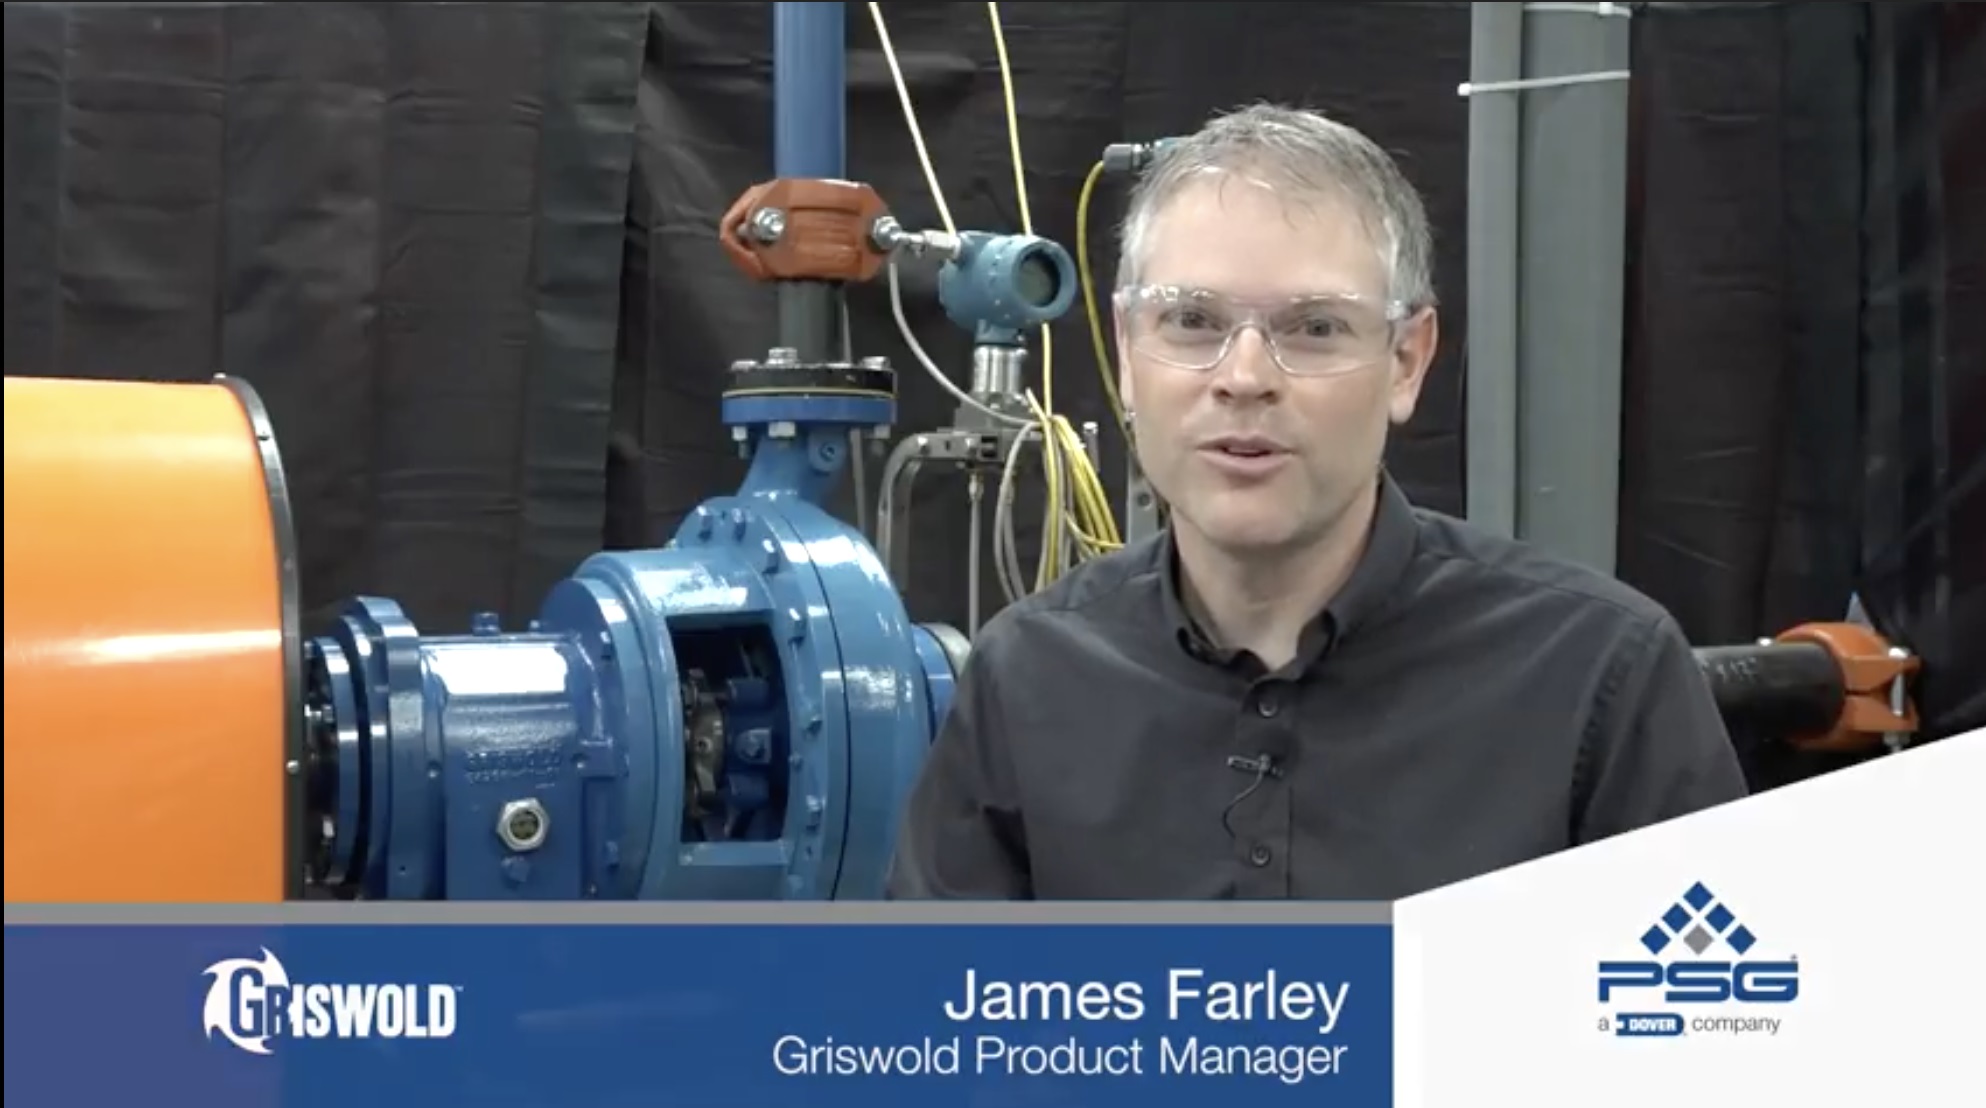 In the latest Centrifugal Pump Minute vlog, James Farley, Griswold product manager, discusses total dynamic head.